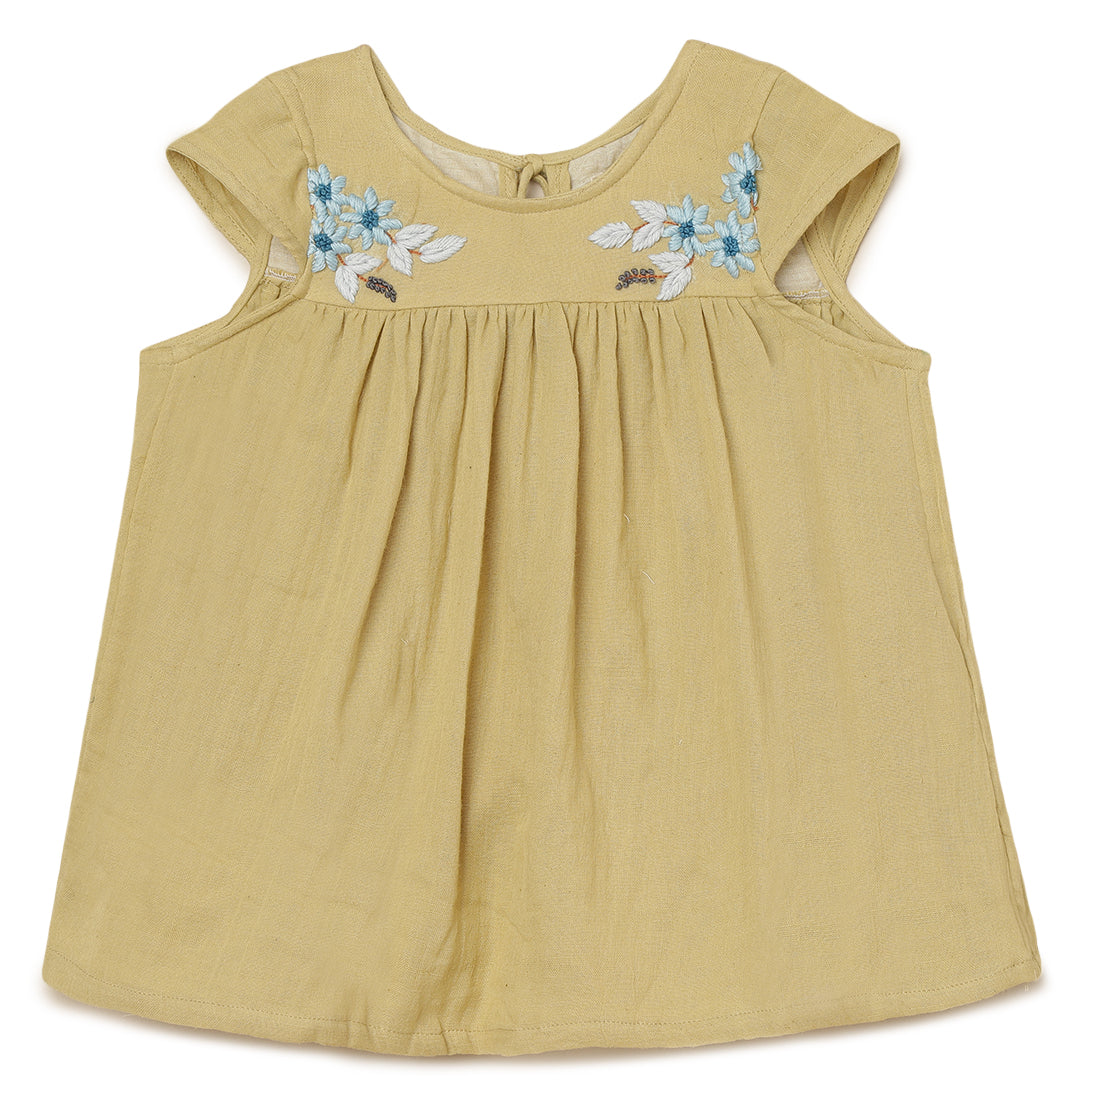 Girls Embroidered Top  - 2 yrs to 6 yrs - Front